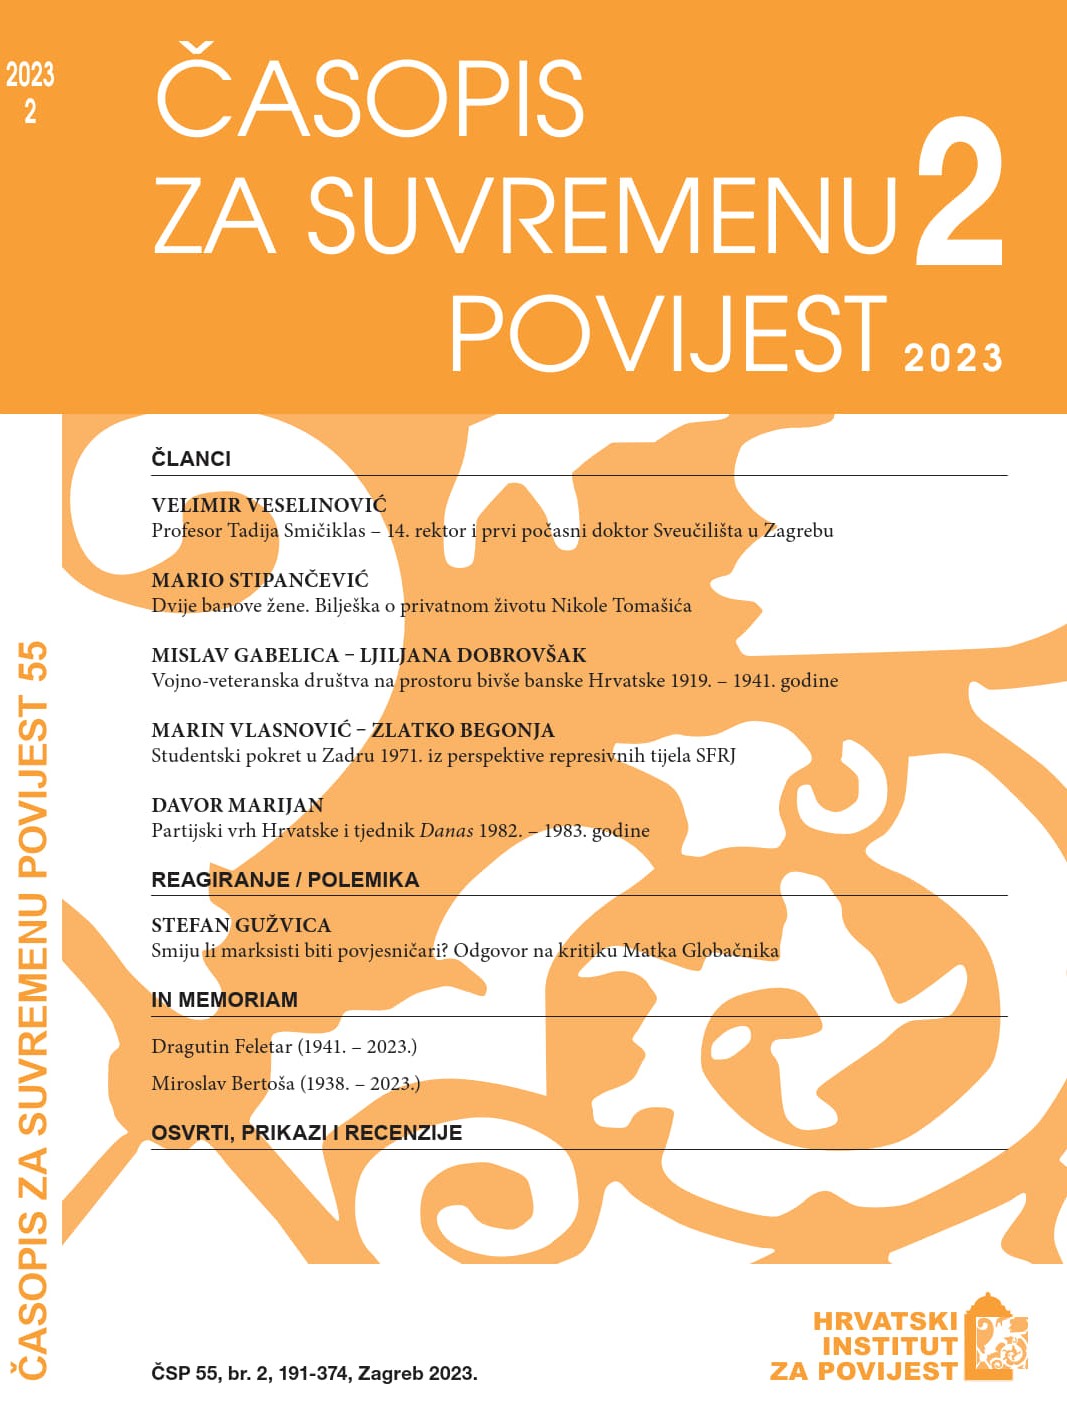 Professor Tadija Smičiklas – rector magnificus and the first Honorary Doctor of the University of Zagreb Cover Image